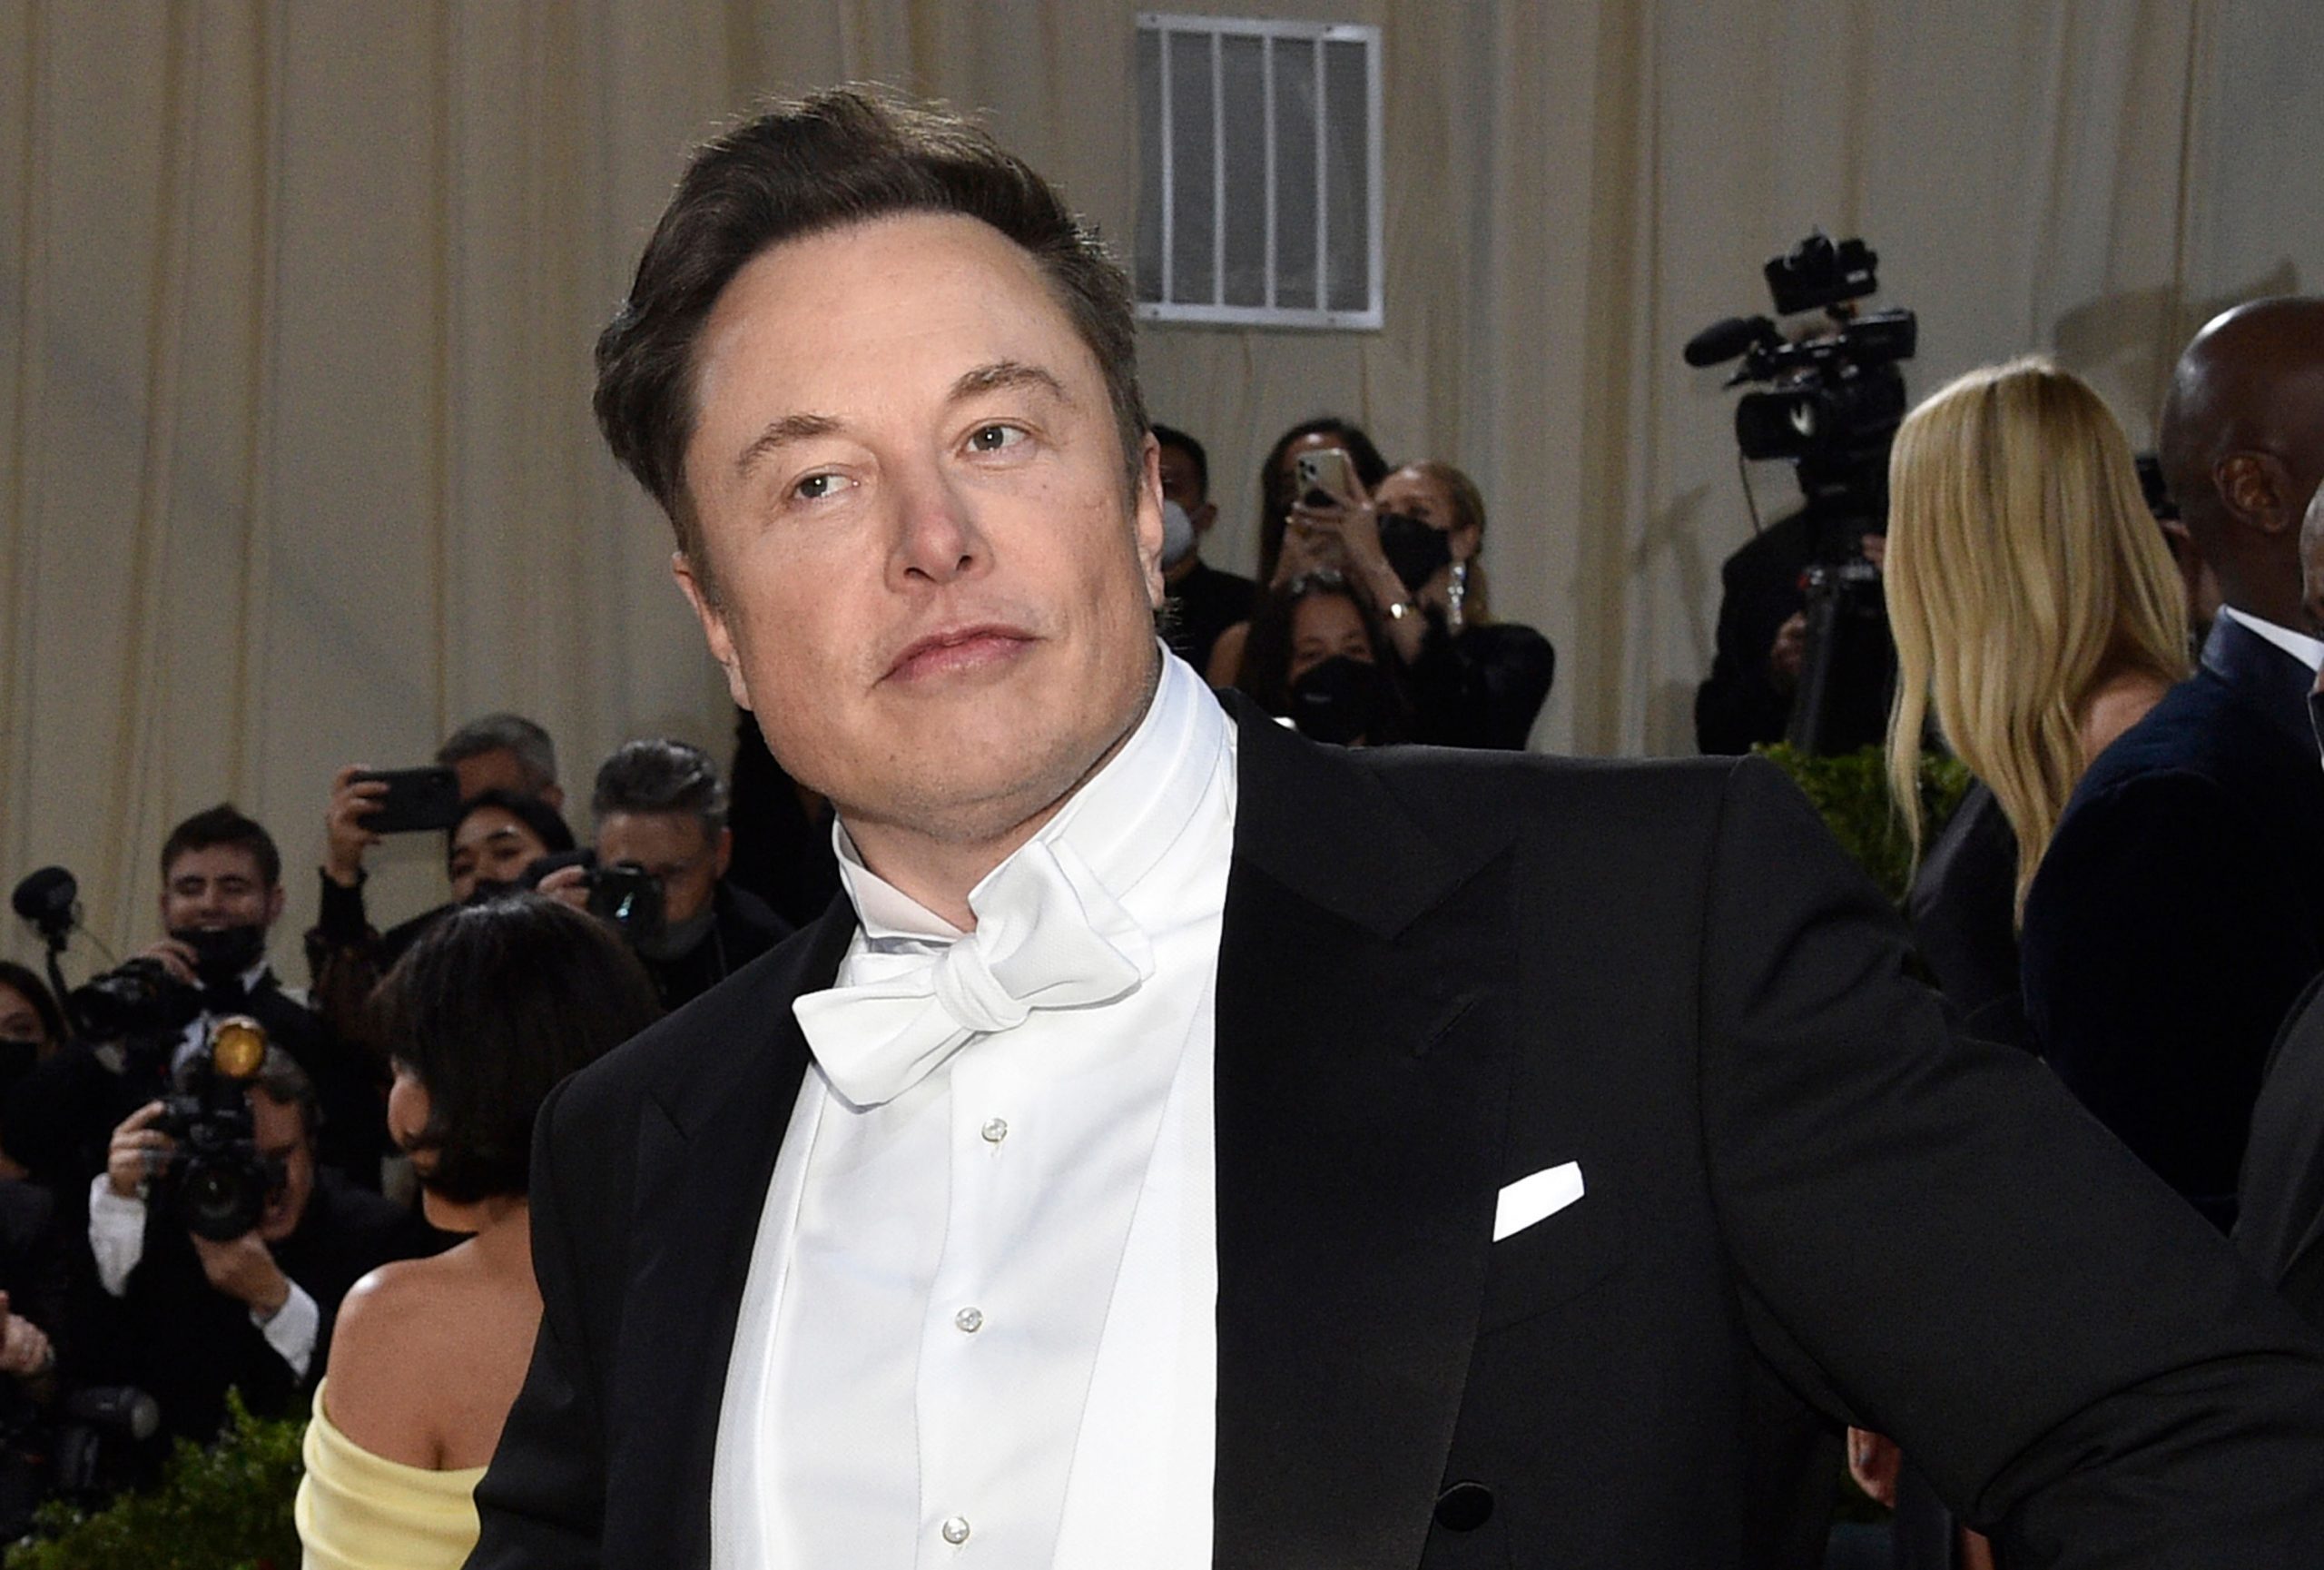 Musk says ‘haven’t even had sex in ages’ amid affair scandal